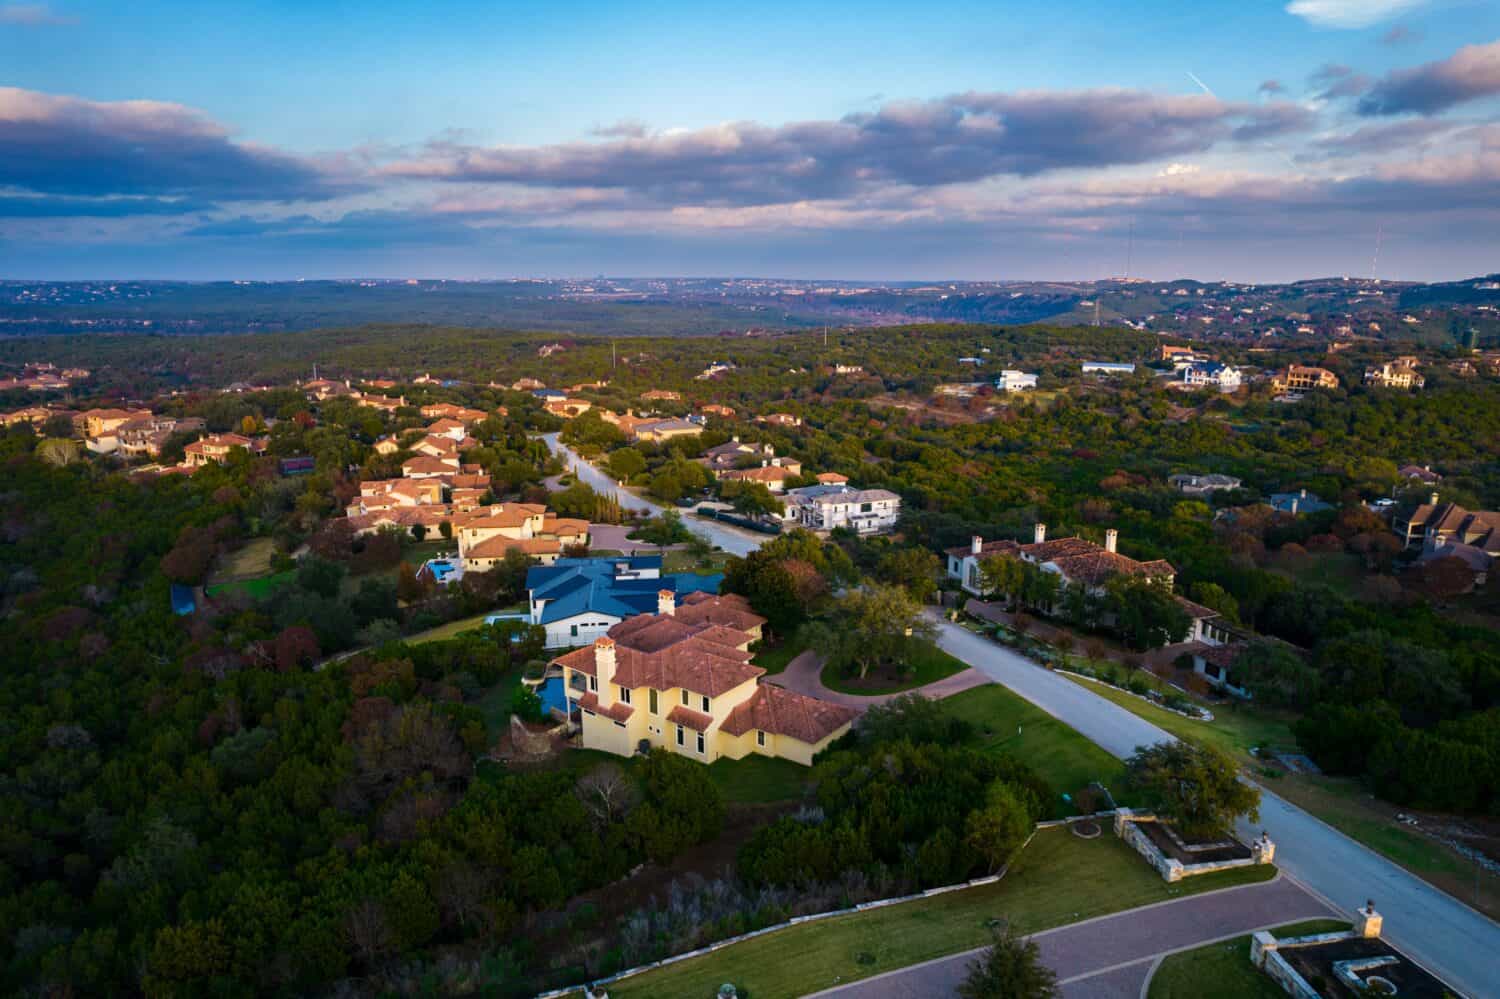 <p>Home to a small population of only 3,234 people, the town of Barton Creek is the 5th best place to retire in the state. Great for jobs and health & fitness, Barton offers a host of natural attractions, parks, and a variety of nature trails. Of course, there's plenty of food and drinks in the city limits as well. A sizable 33% of the town's population identifies as 65 and over.</p> <p>Agree with this? Hit the Thumbs Up button above. Disagree? Let us know in the comments with what you'd change.</p>